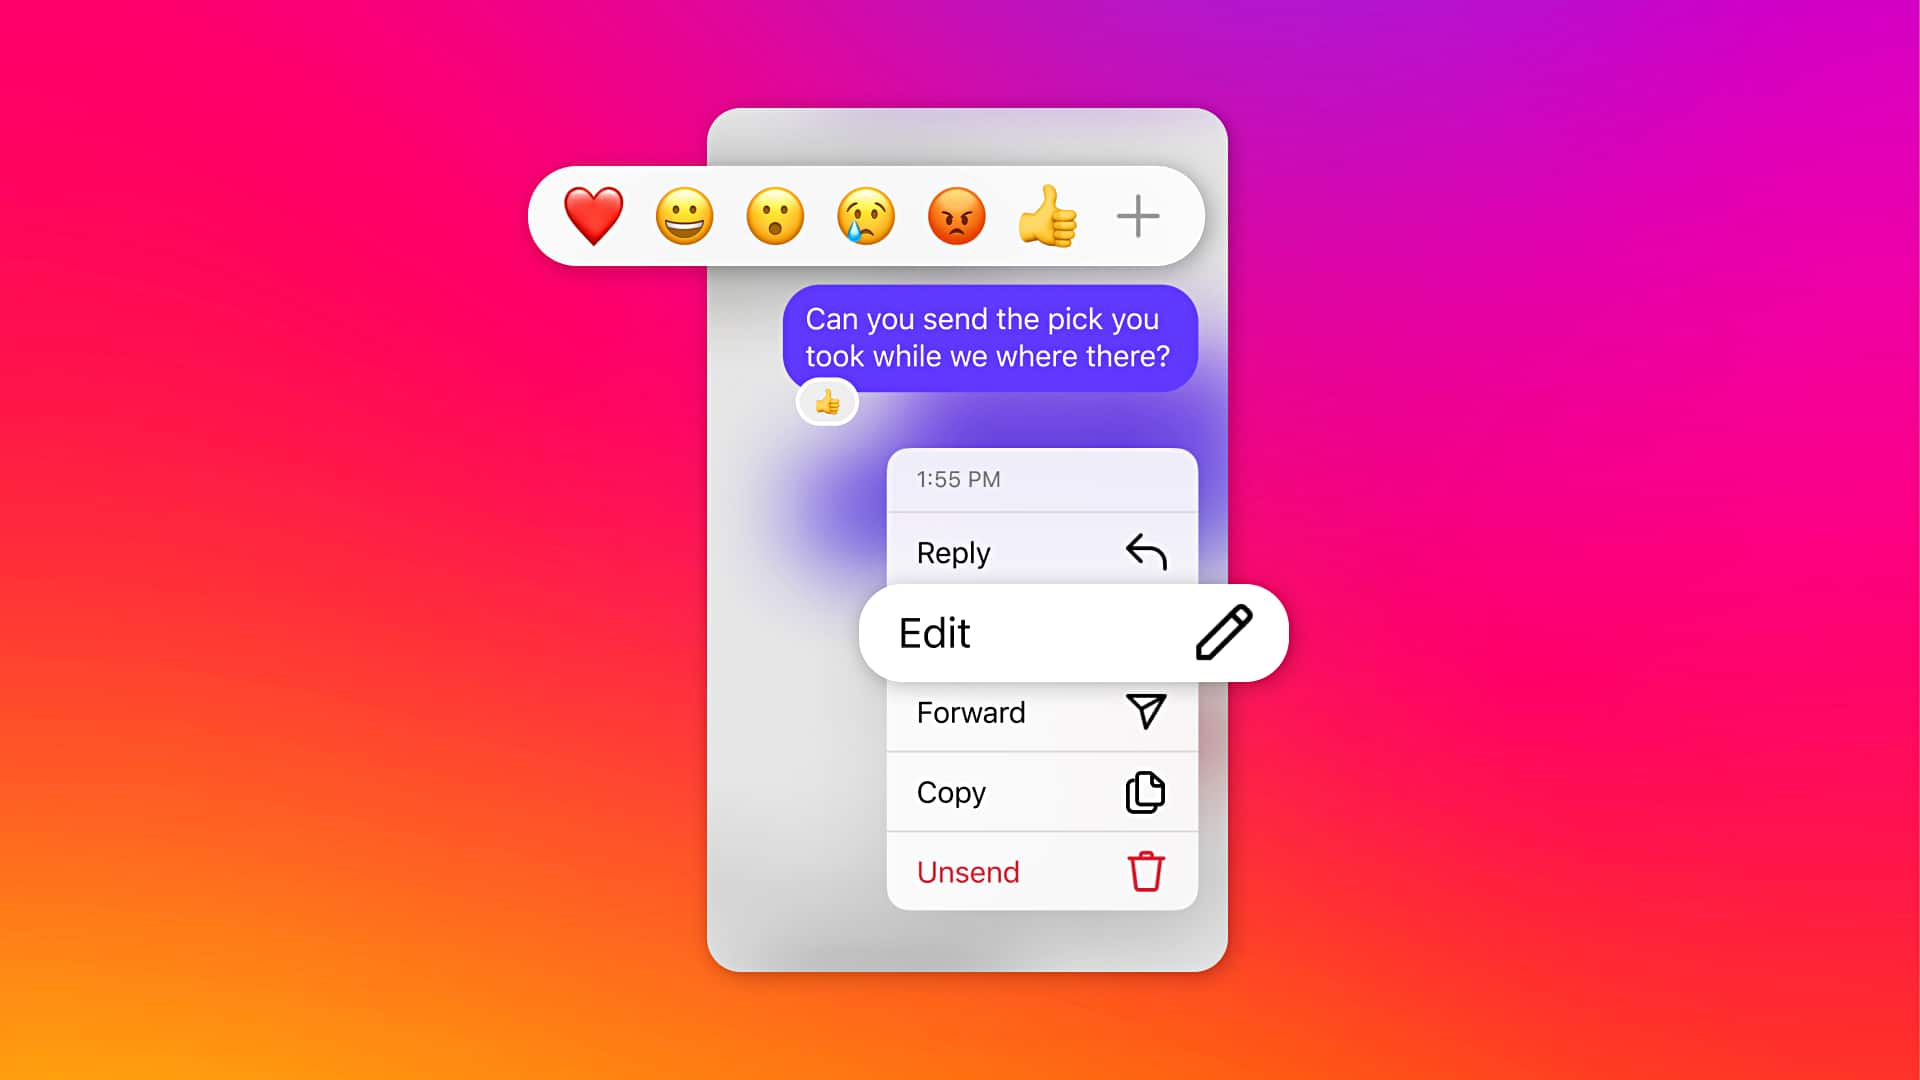 Instagram now allows you to edit DMs: How it works